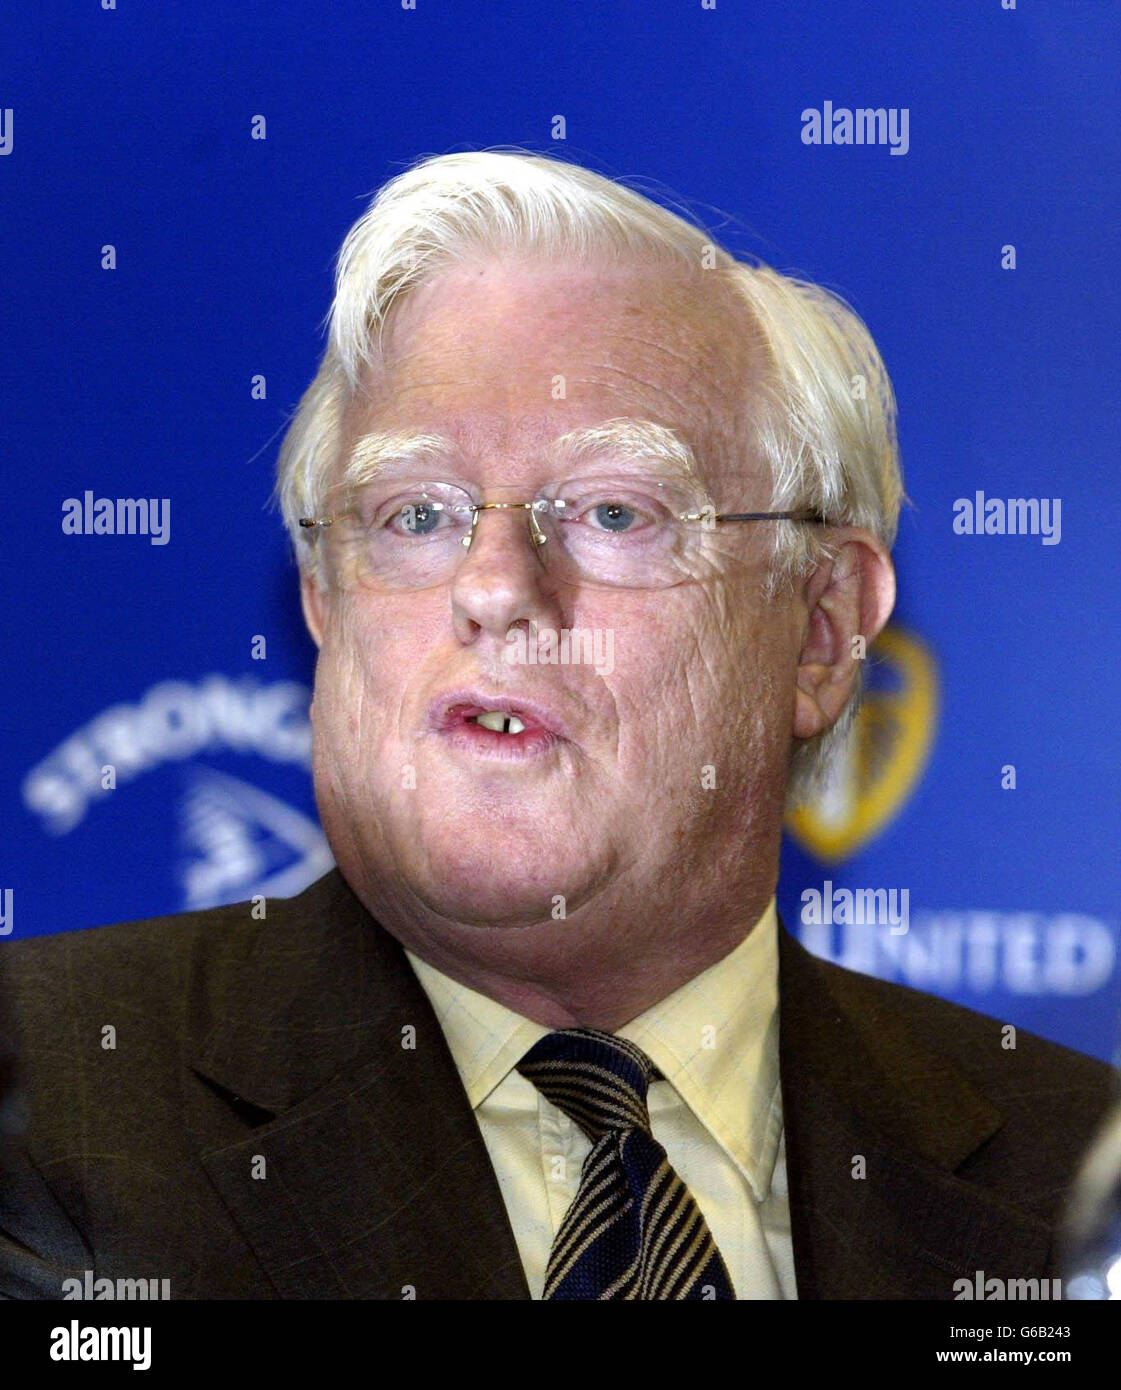 Leeds United's Chairman John McKenzie during a press conference at Elland Road. Peter Reid has been confirmed as Leeds United's third manager in a year. Stock Photo